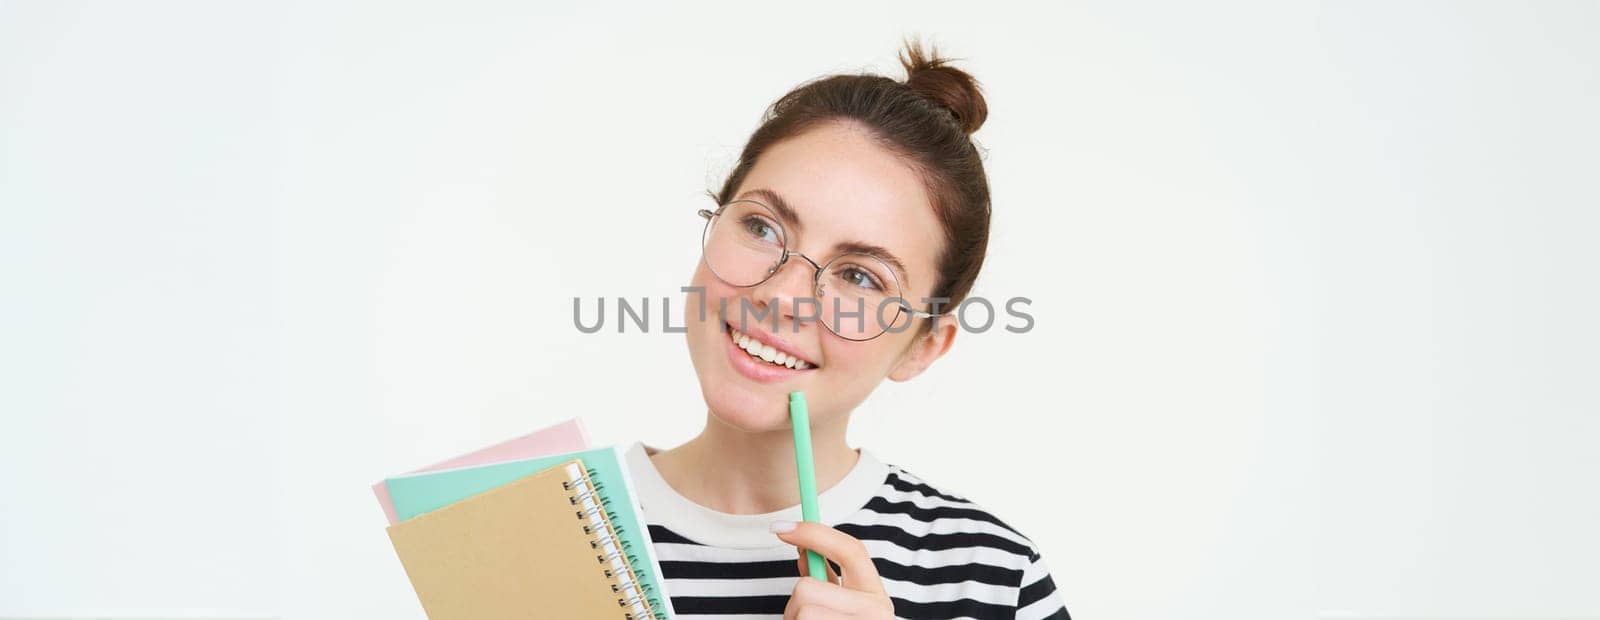 Portrait of smart girl in glasses, tutor holding pen and notebooks, student carry her homework notes, standing over white background.